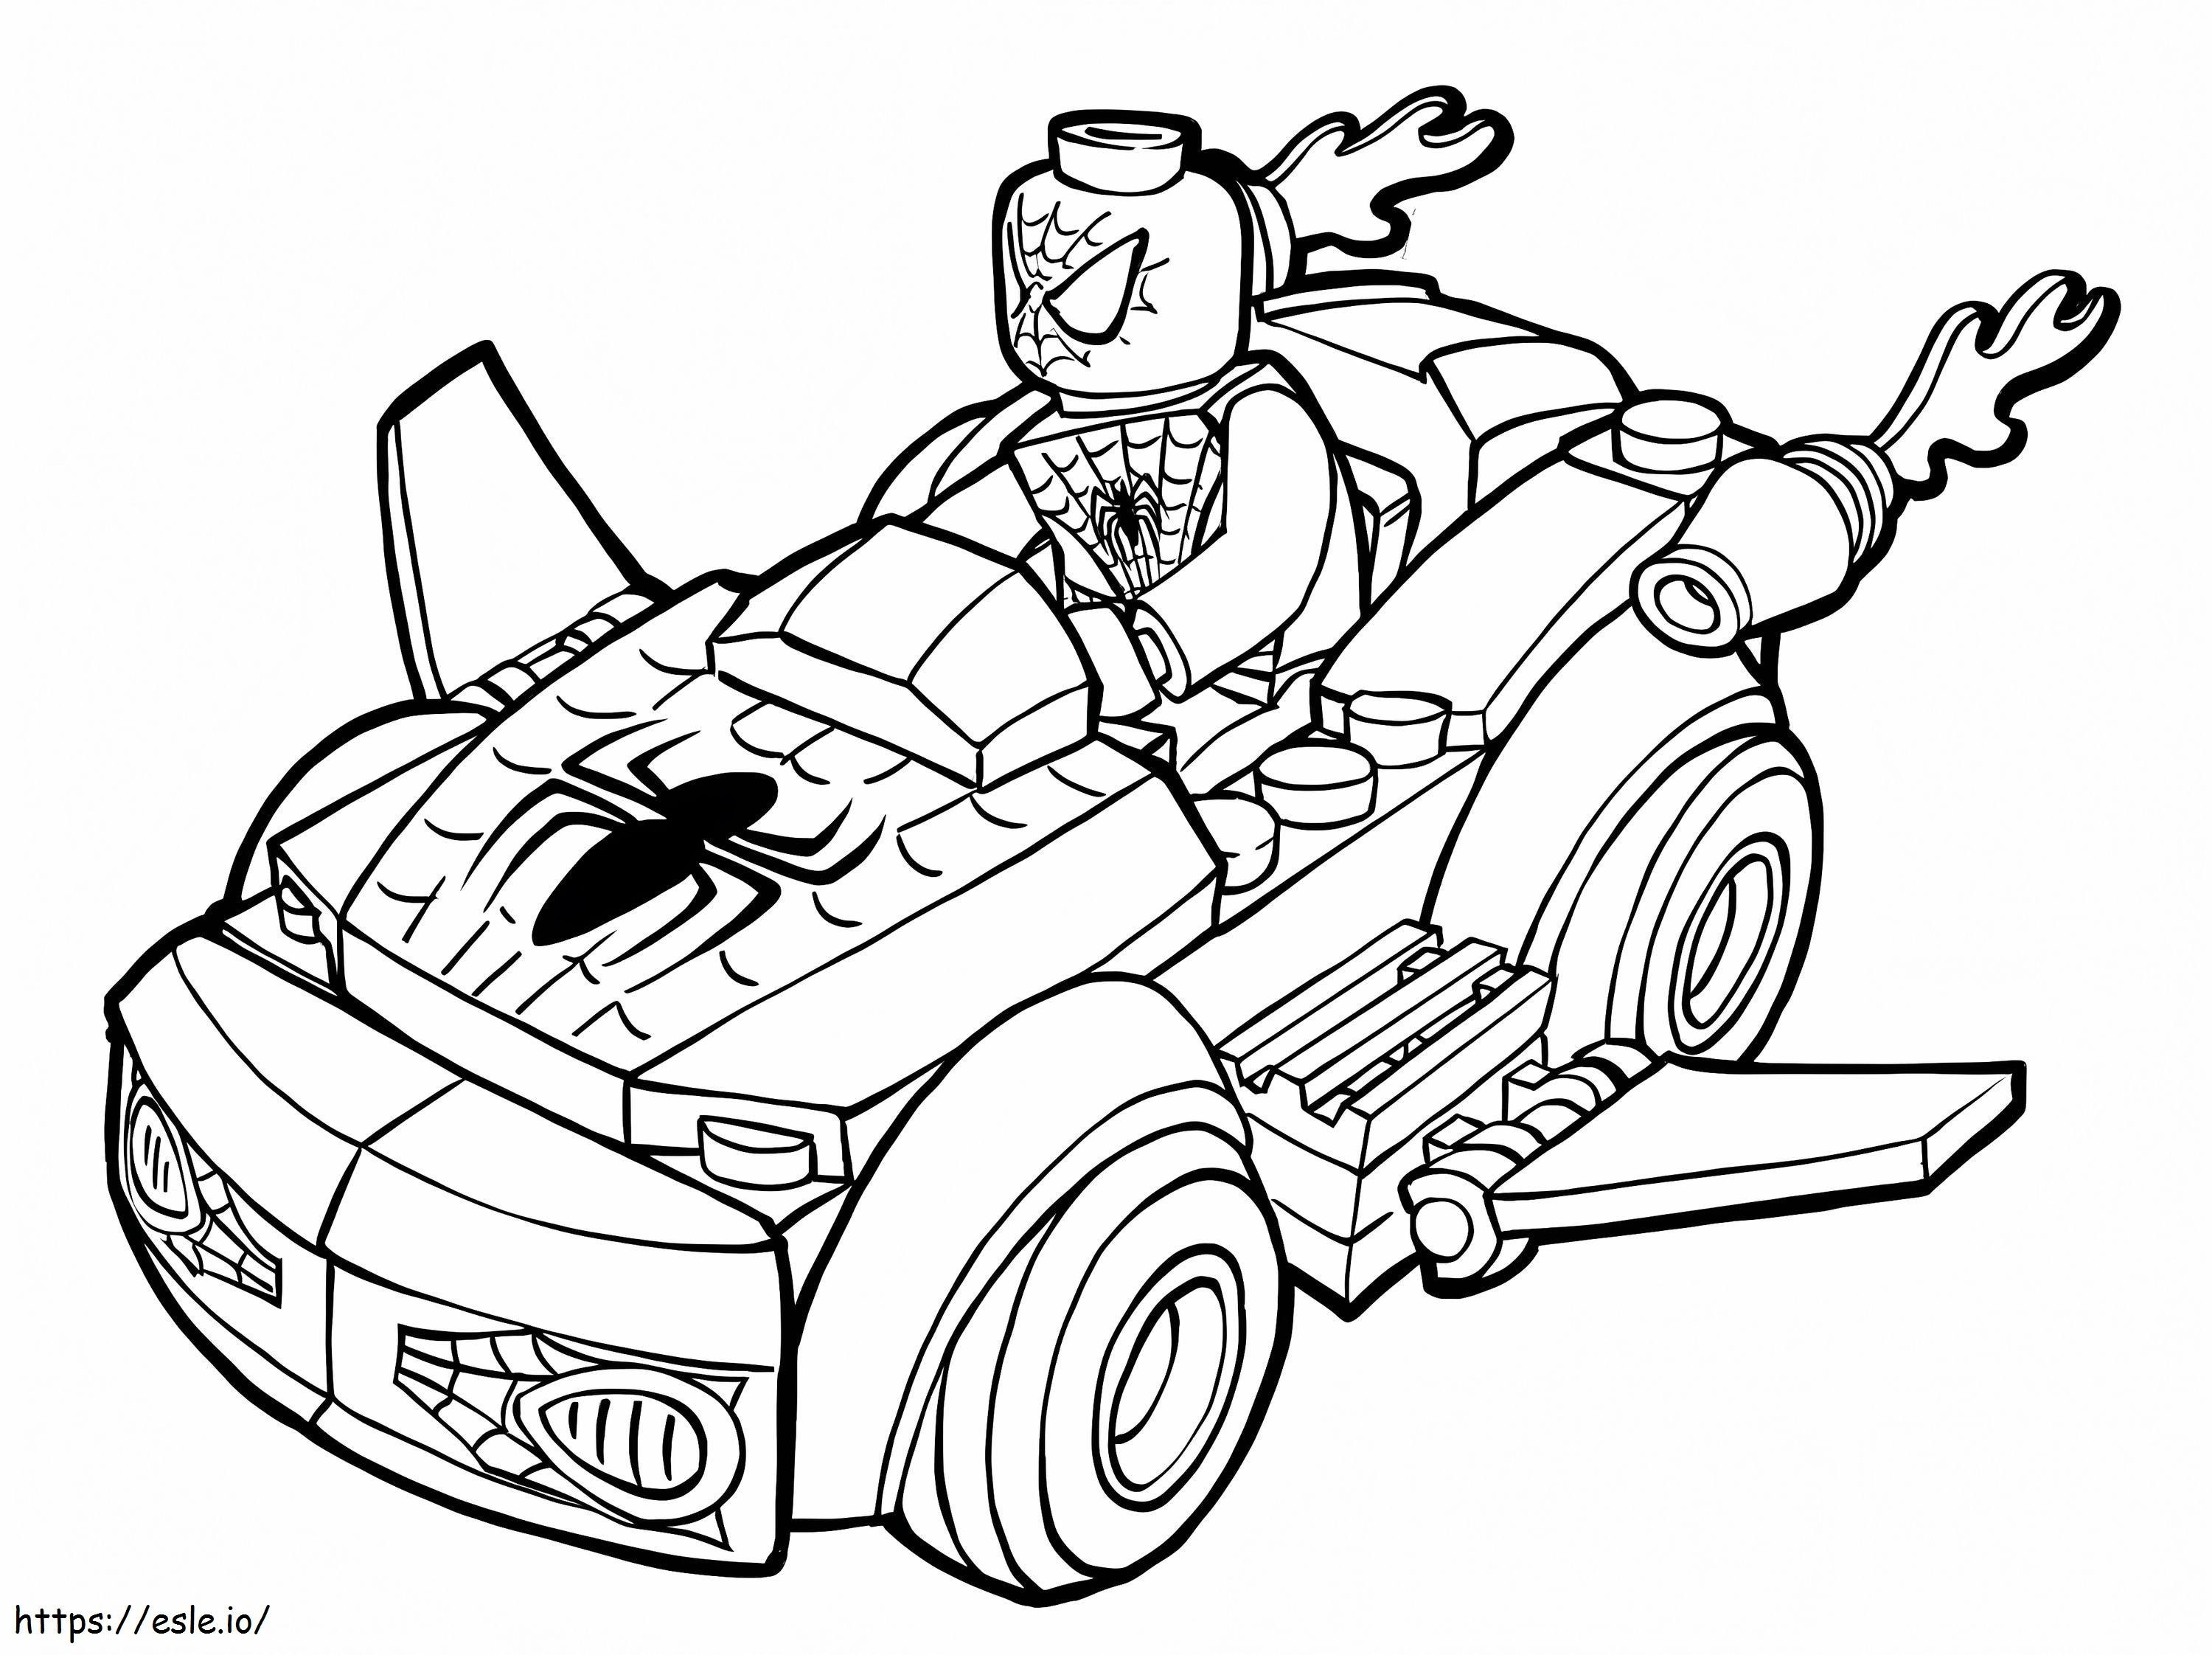 Lego Spider Man Drive Car coloring page